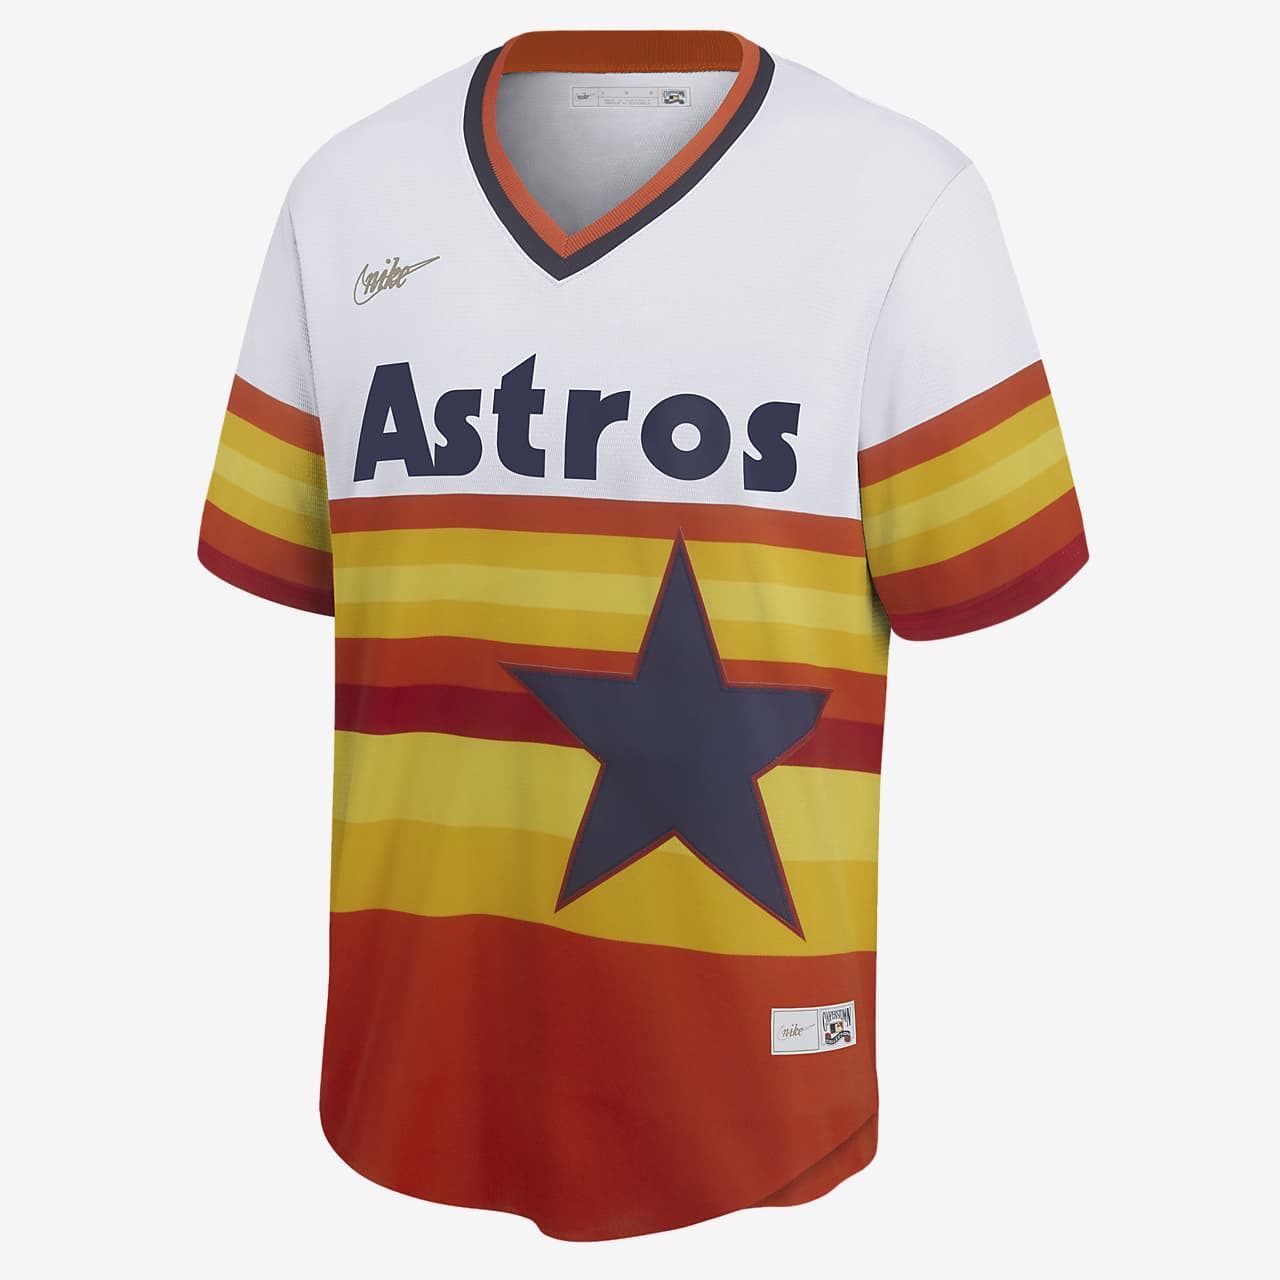 official astros shirts